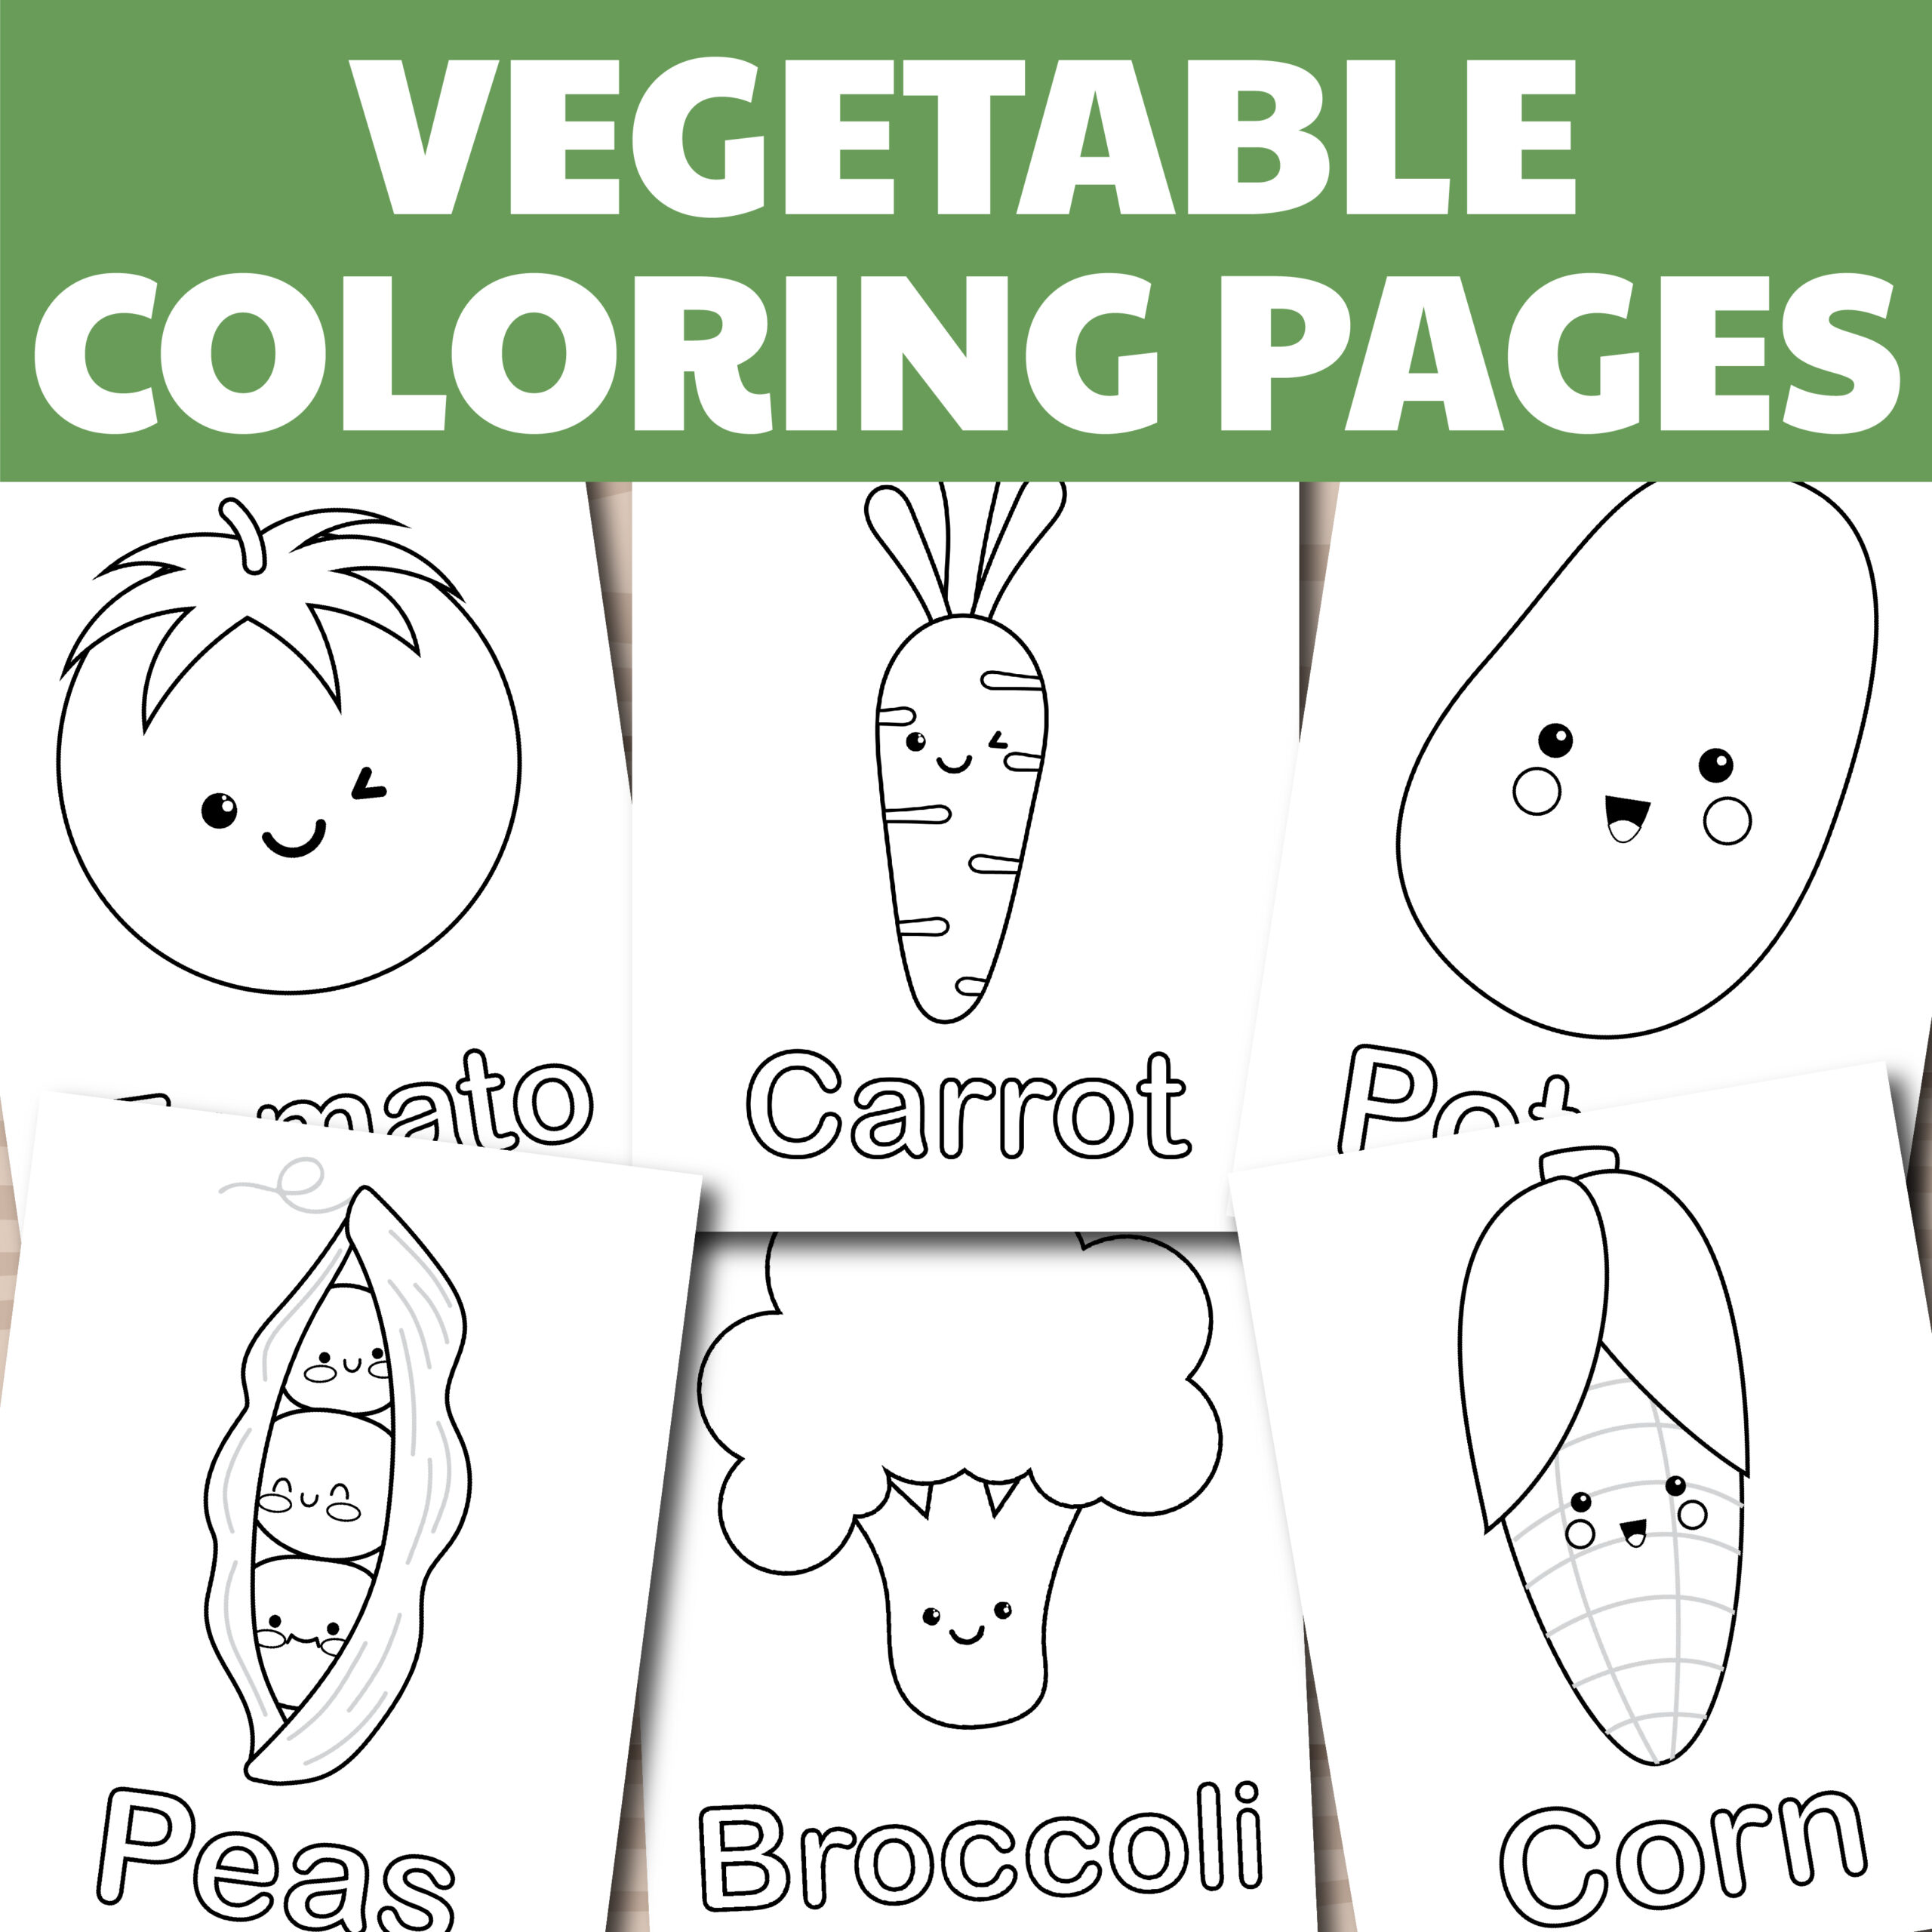 Vegetable coloring sheets coloring pages for kids